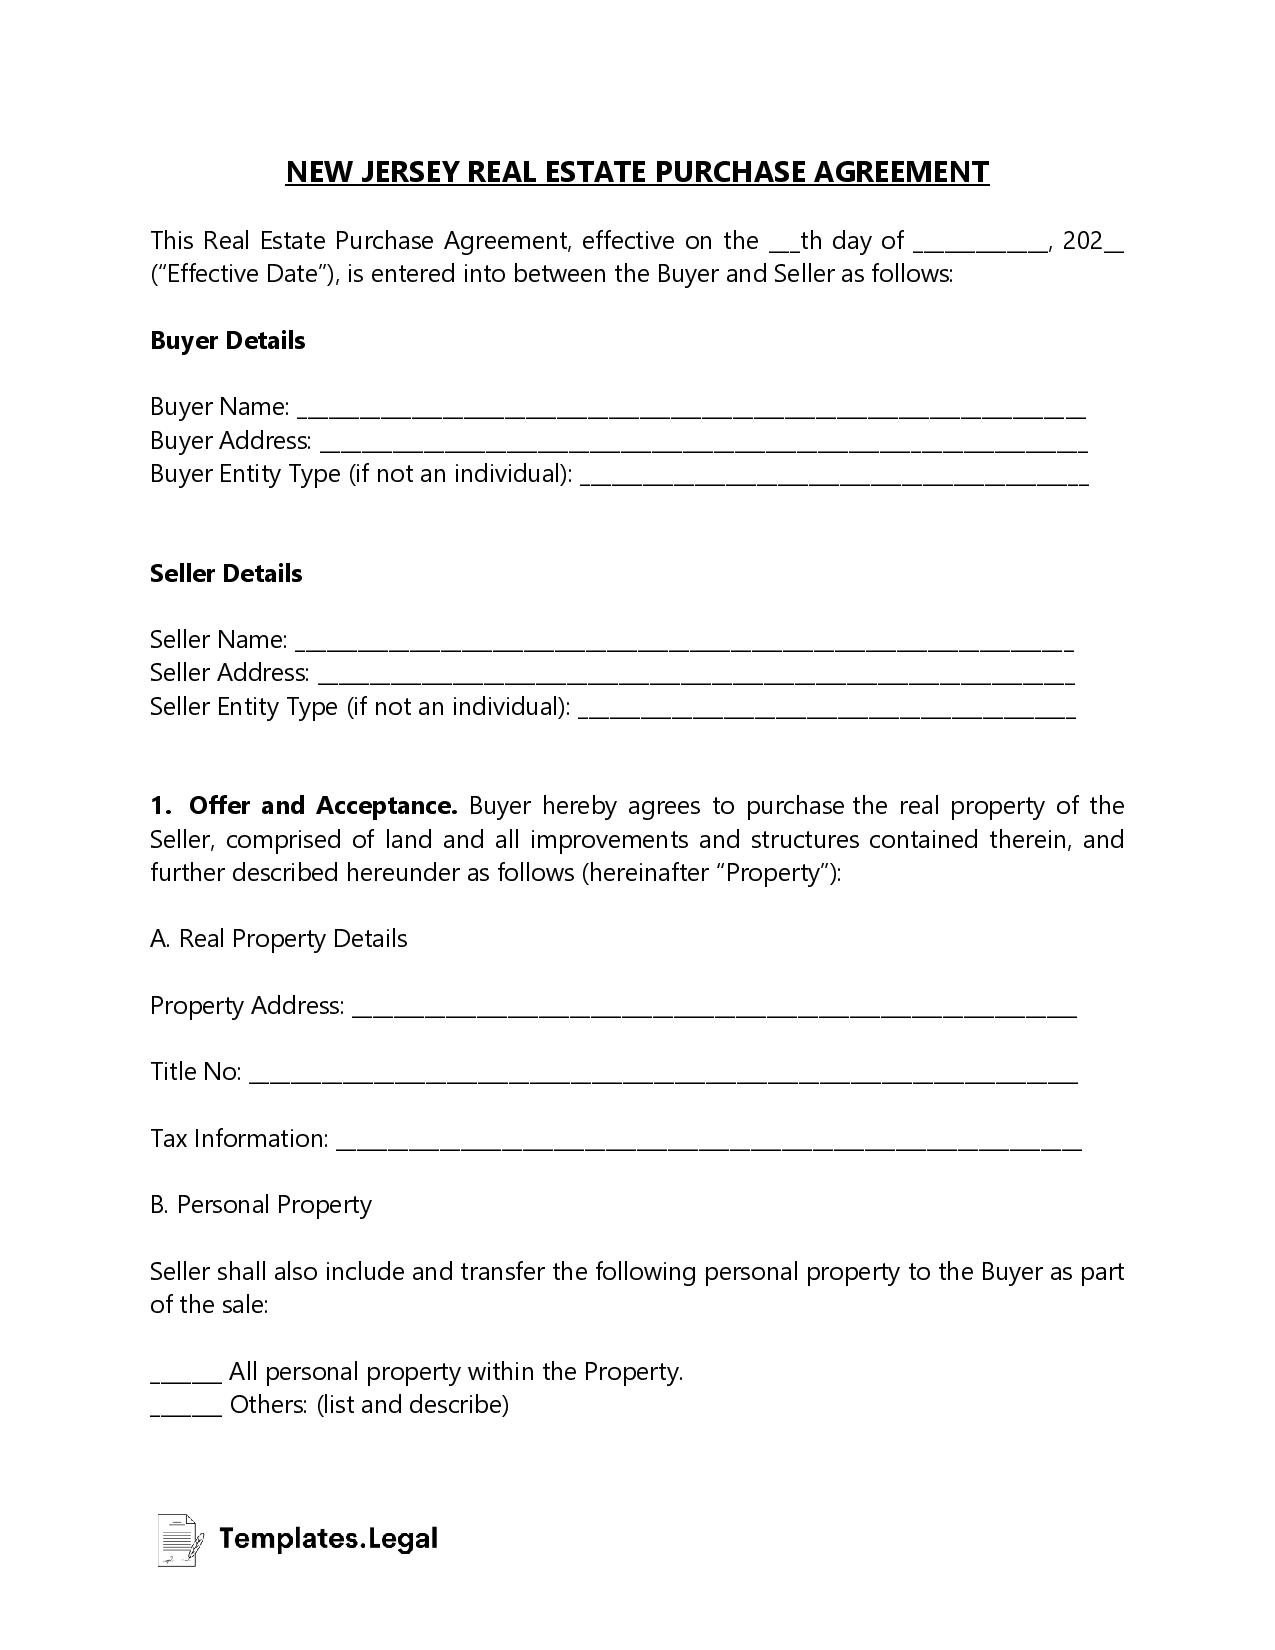 New Jersey Real Estate Purchase Agreement - Templates.Legal